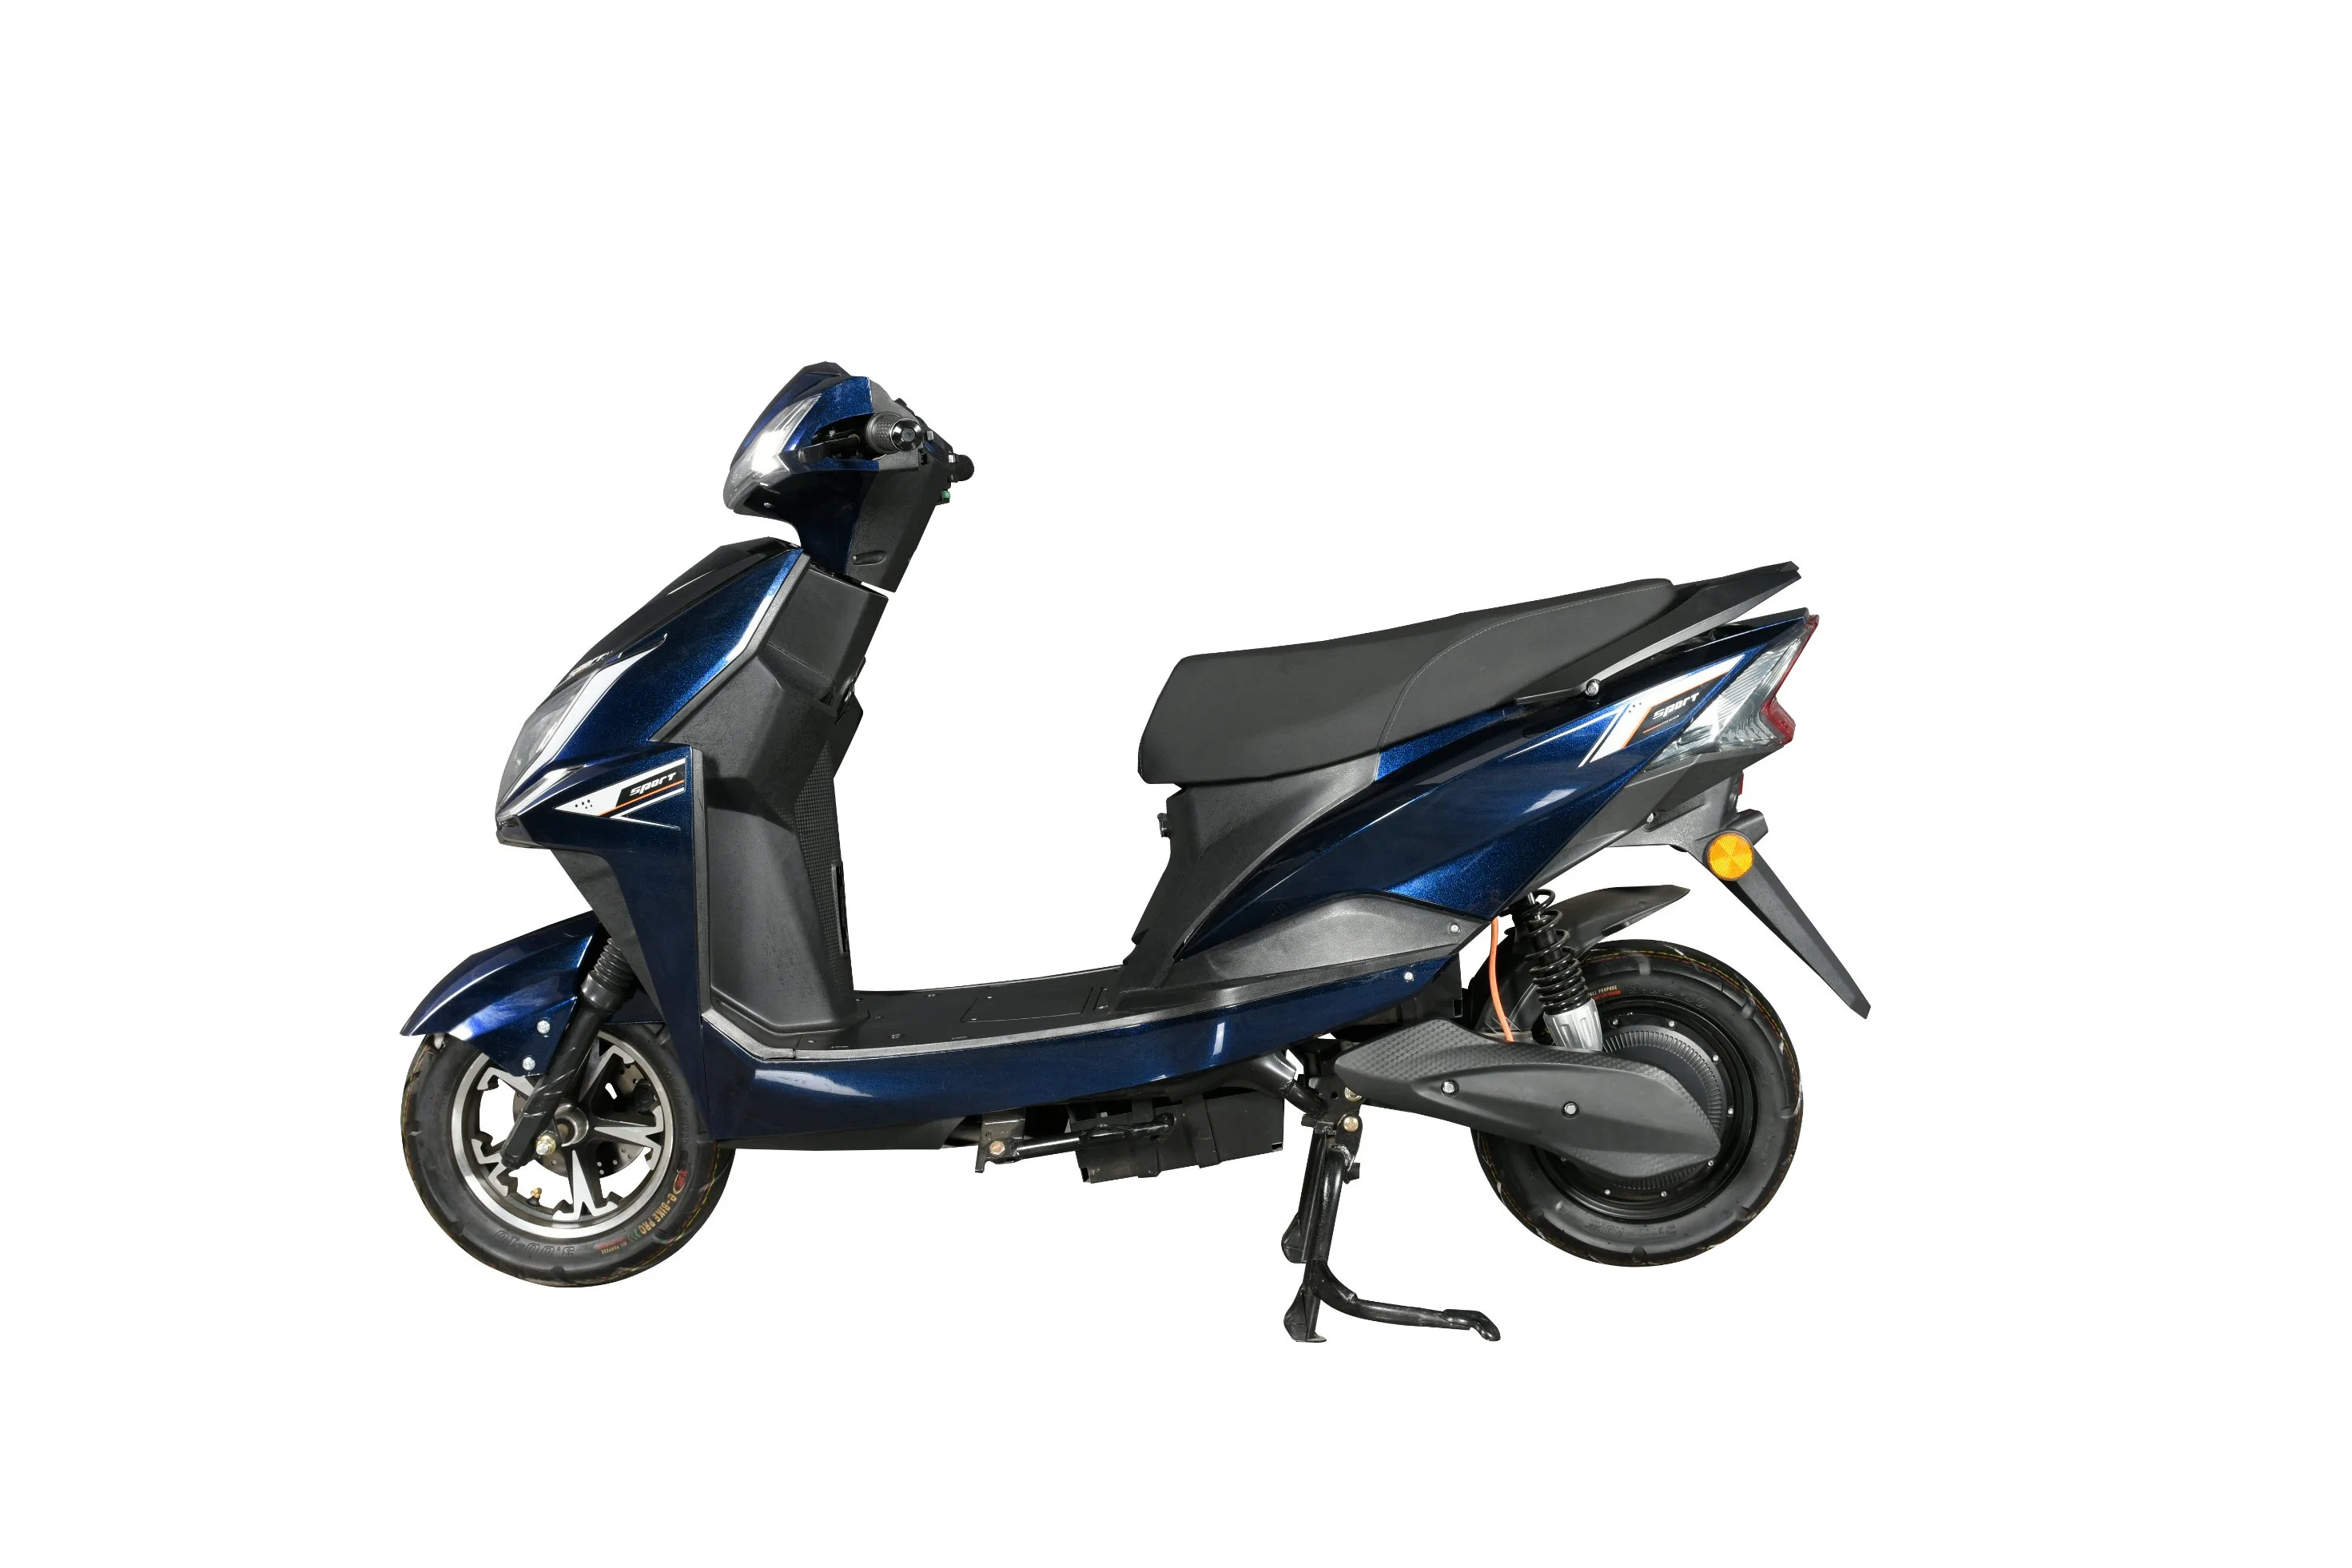 Two Wheel Electric Motorcycle Adult 2 Wheel E Bike Electric Vehicle Electric Motor Scooter for Personal or Passengers